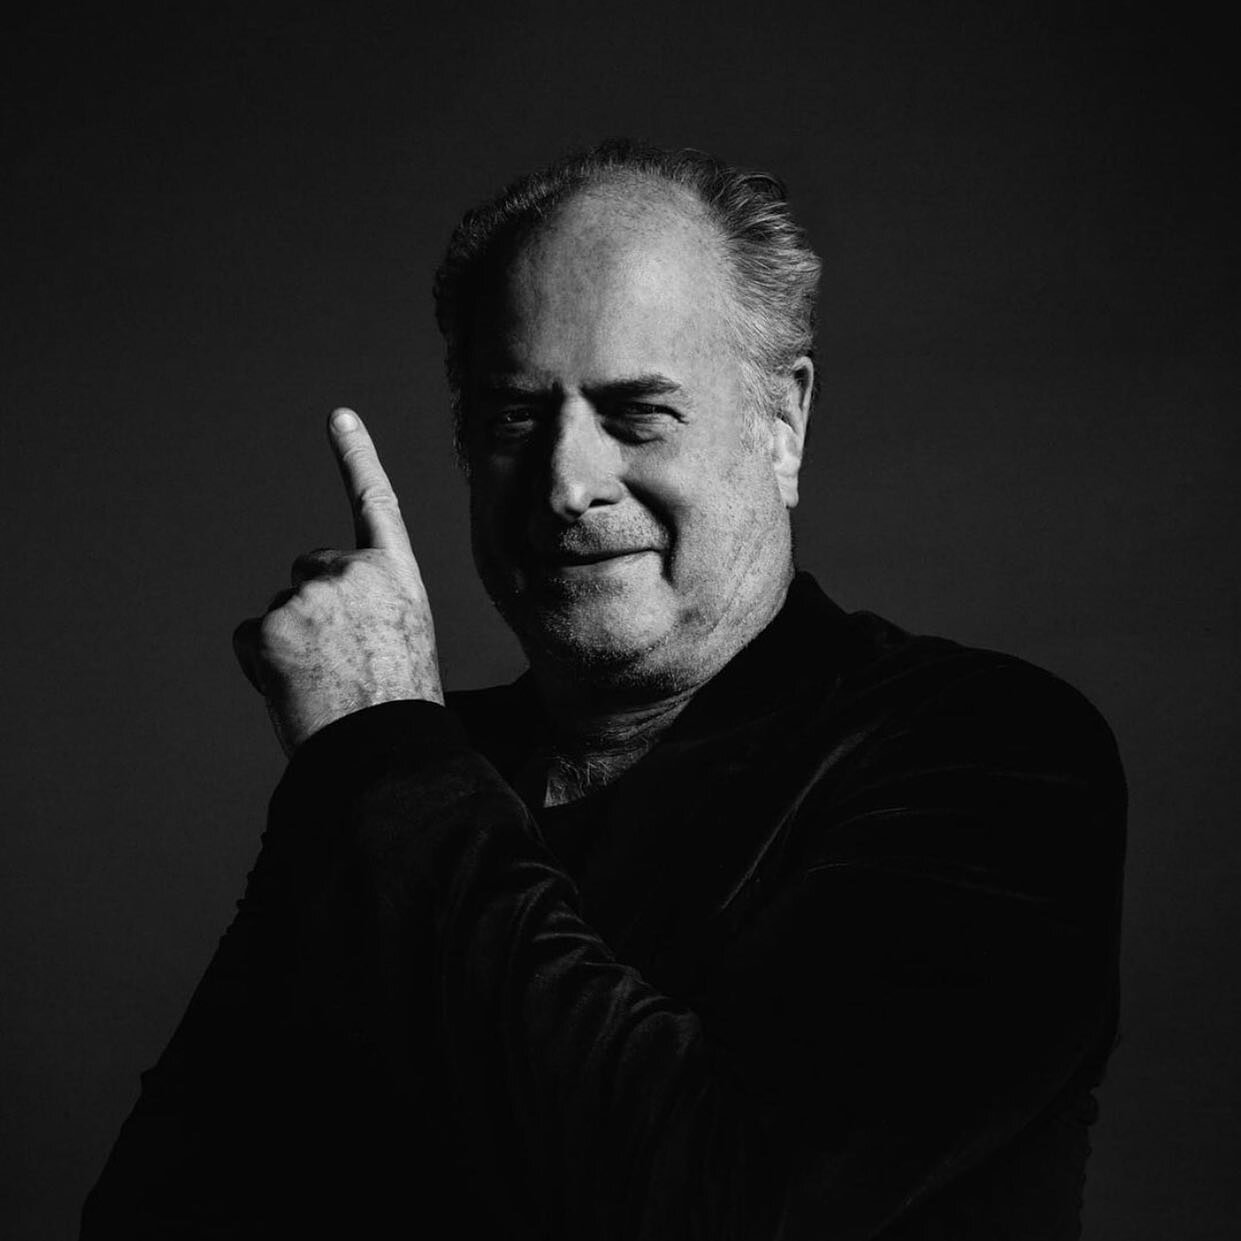 &bull; Vale Michael Solomon Gudinski &mdash; 22 August 1952-02 March 2021 &bull; 

The &quot;heart of Australian music ripped out&quot;. 

Such sad news to see Michael Gudinksi has passed on. Easily one of, if not THE most influential people in the A